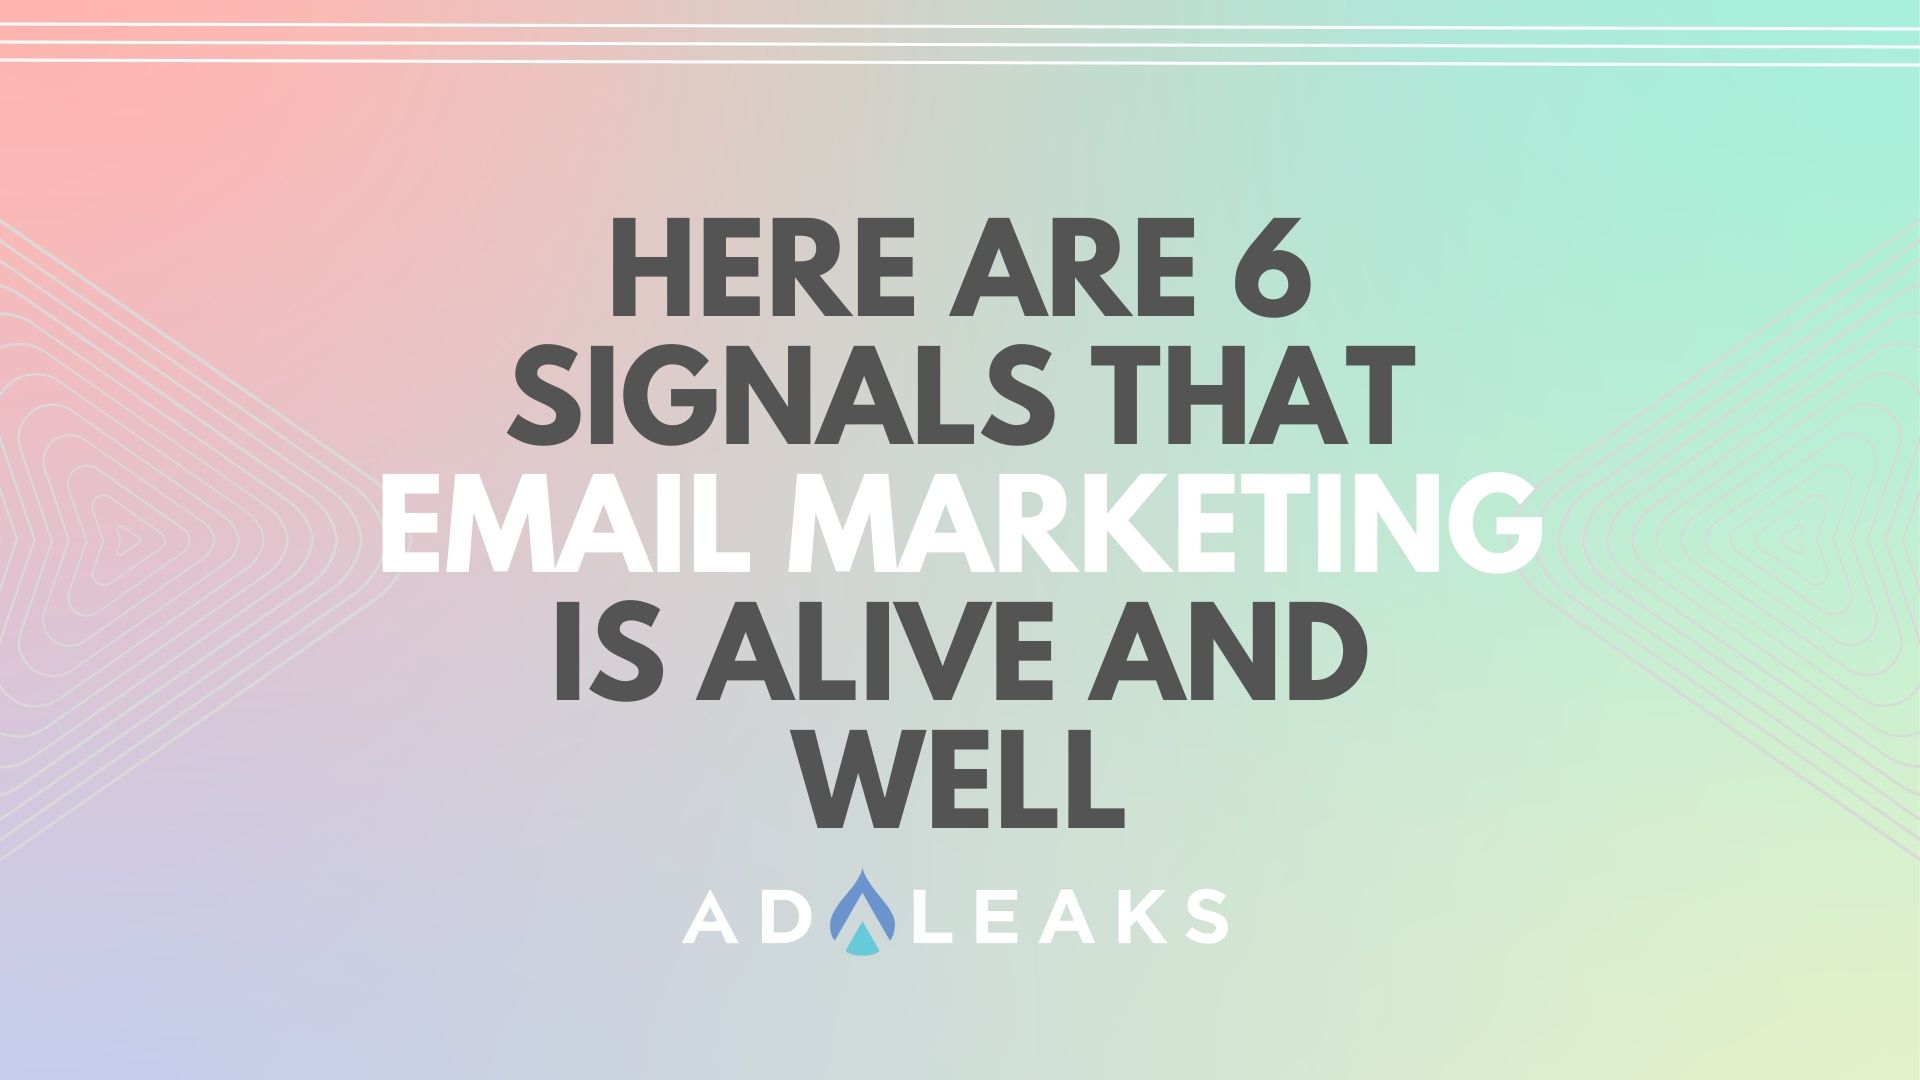 here are 6 signals that email marketing is alive and well